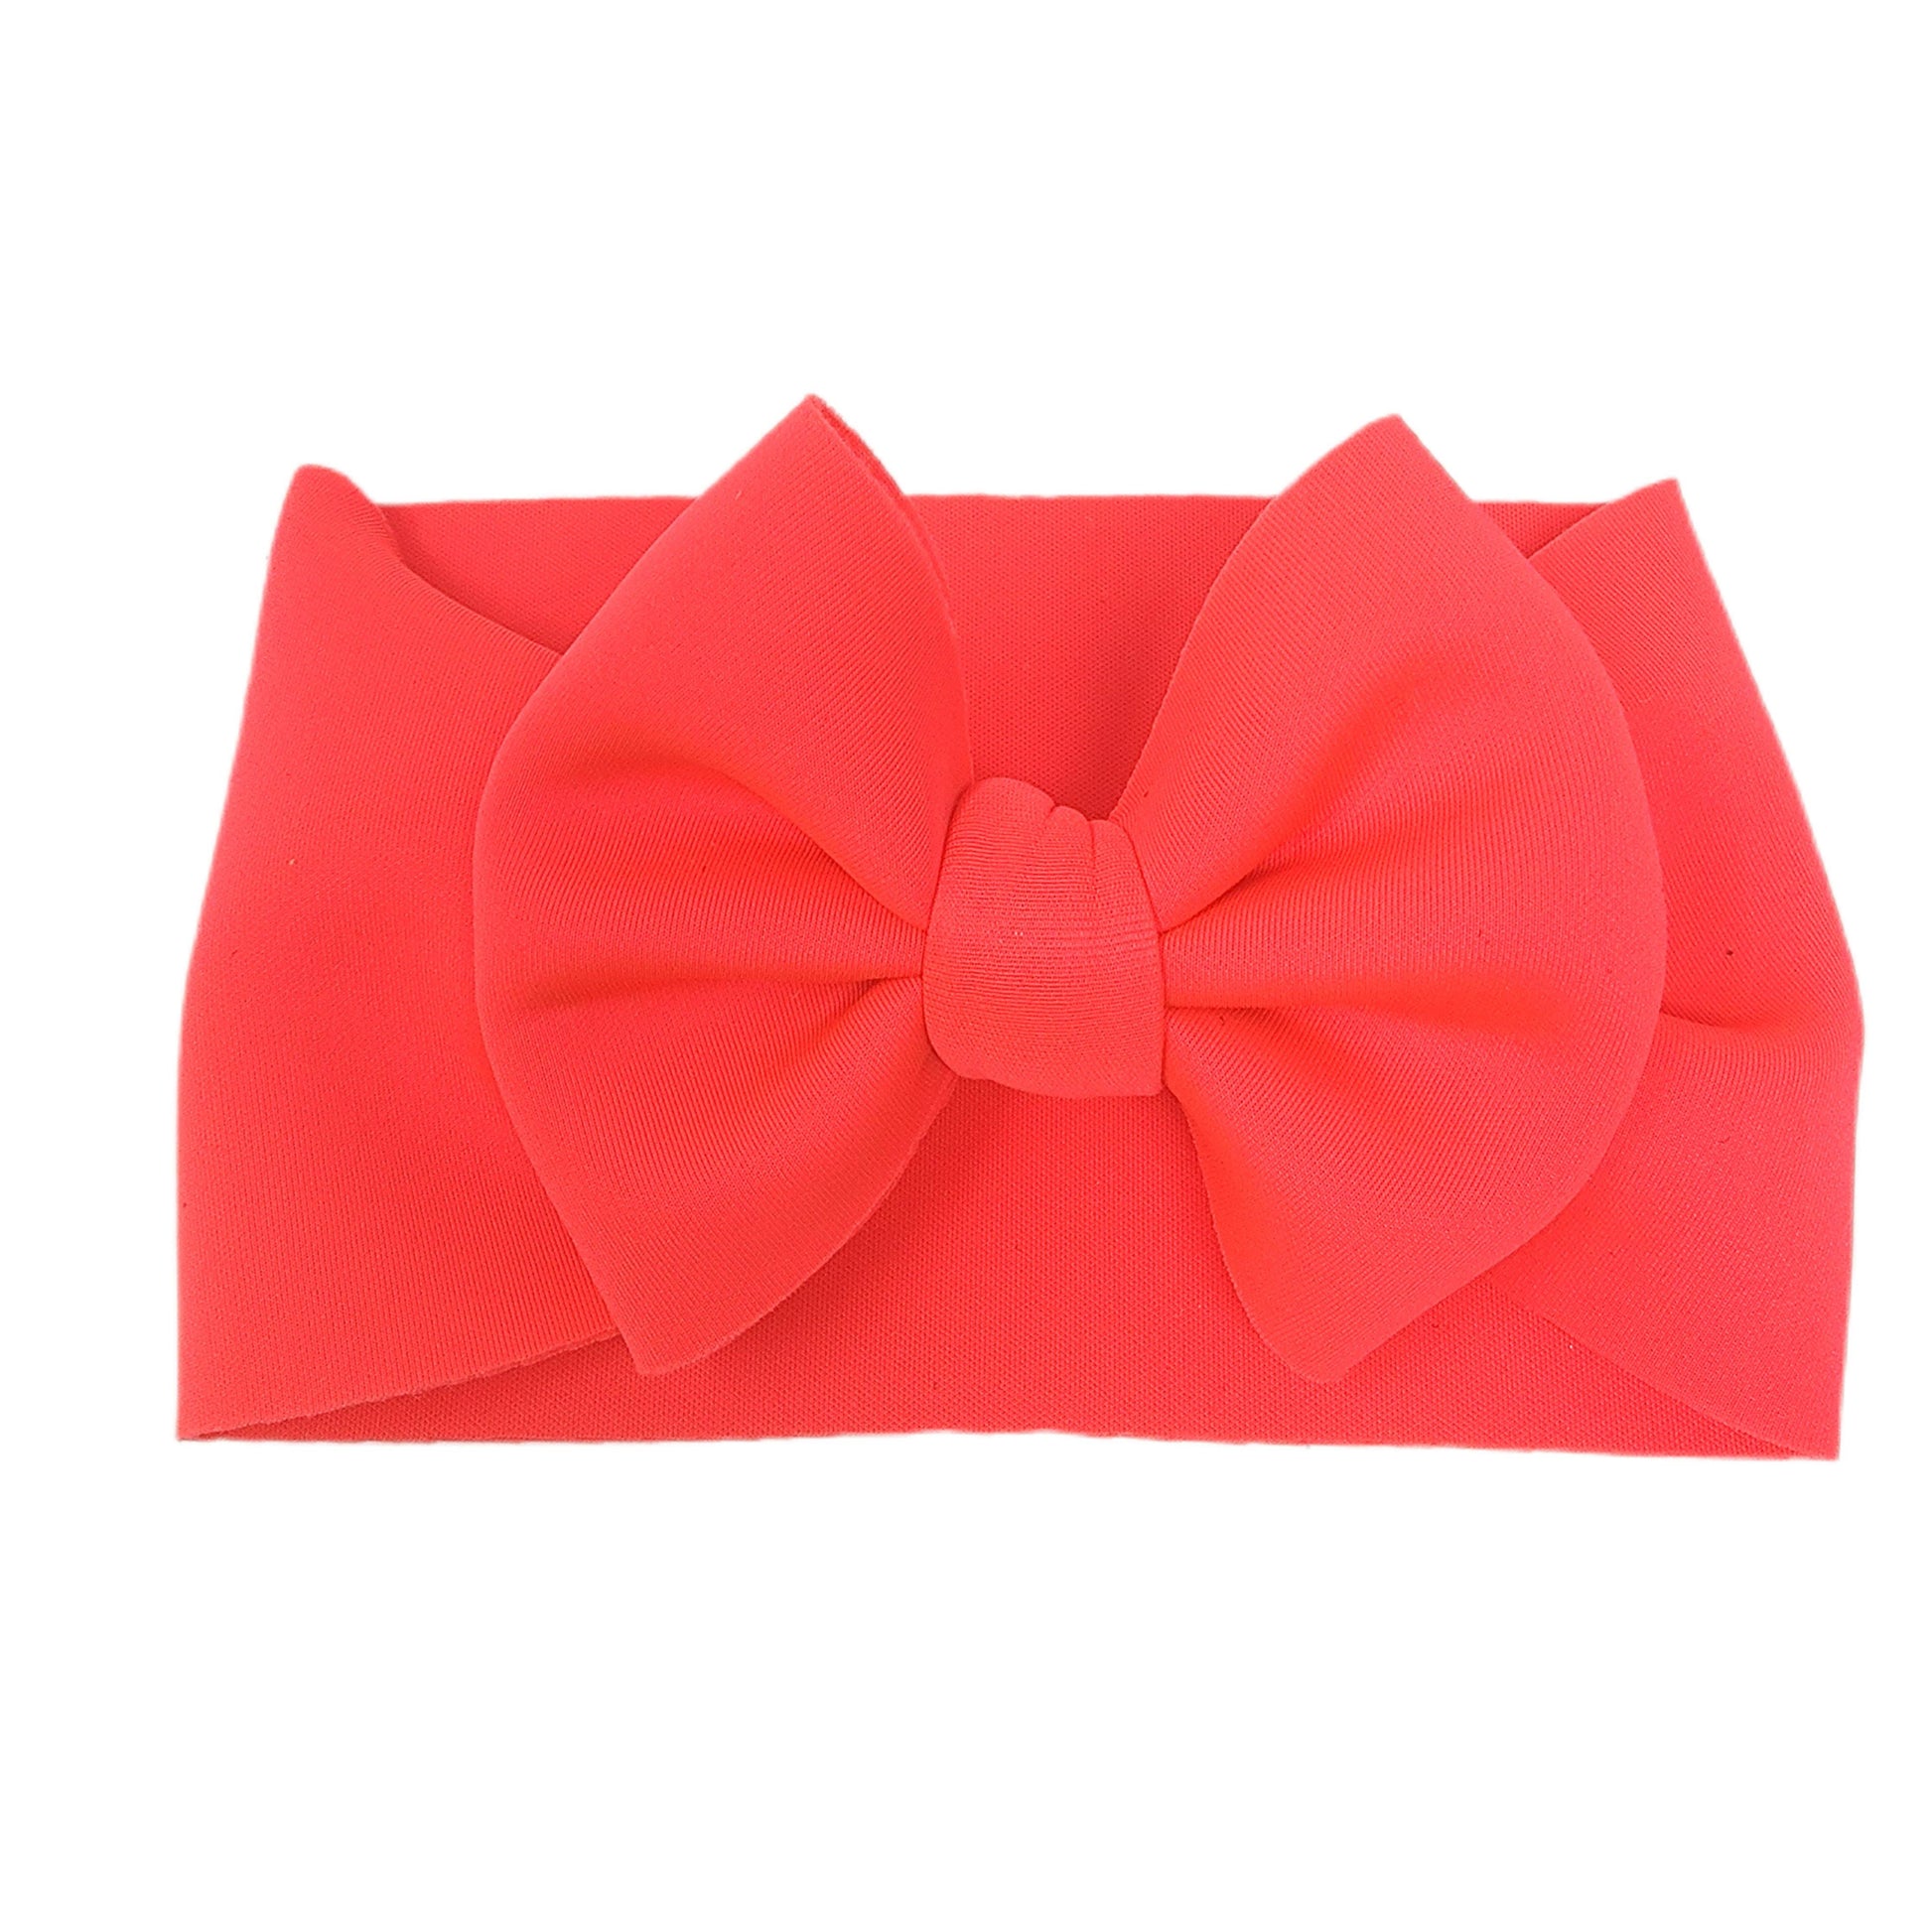 Neon Pink Puffy Fabric Headwrap